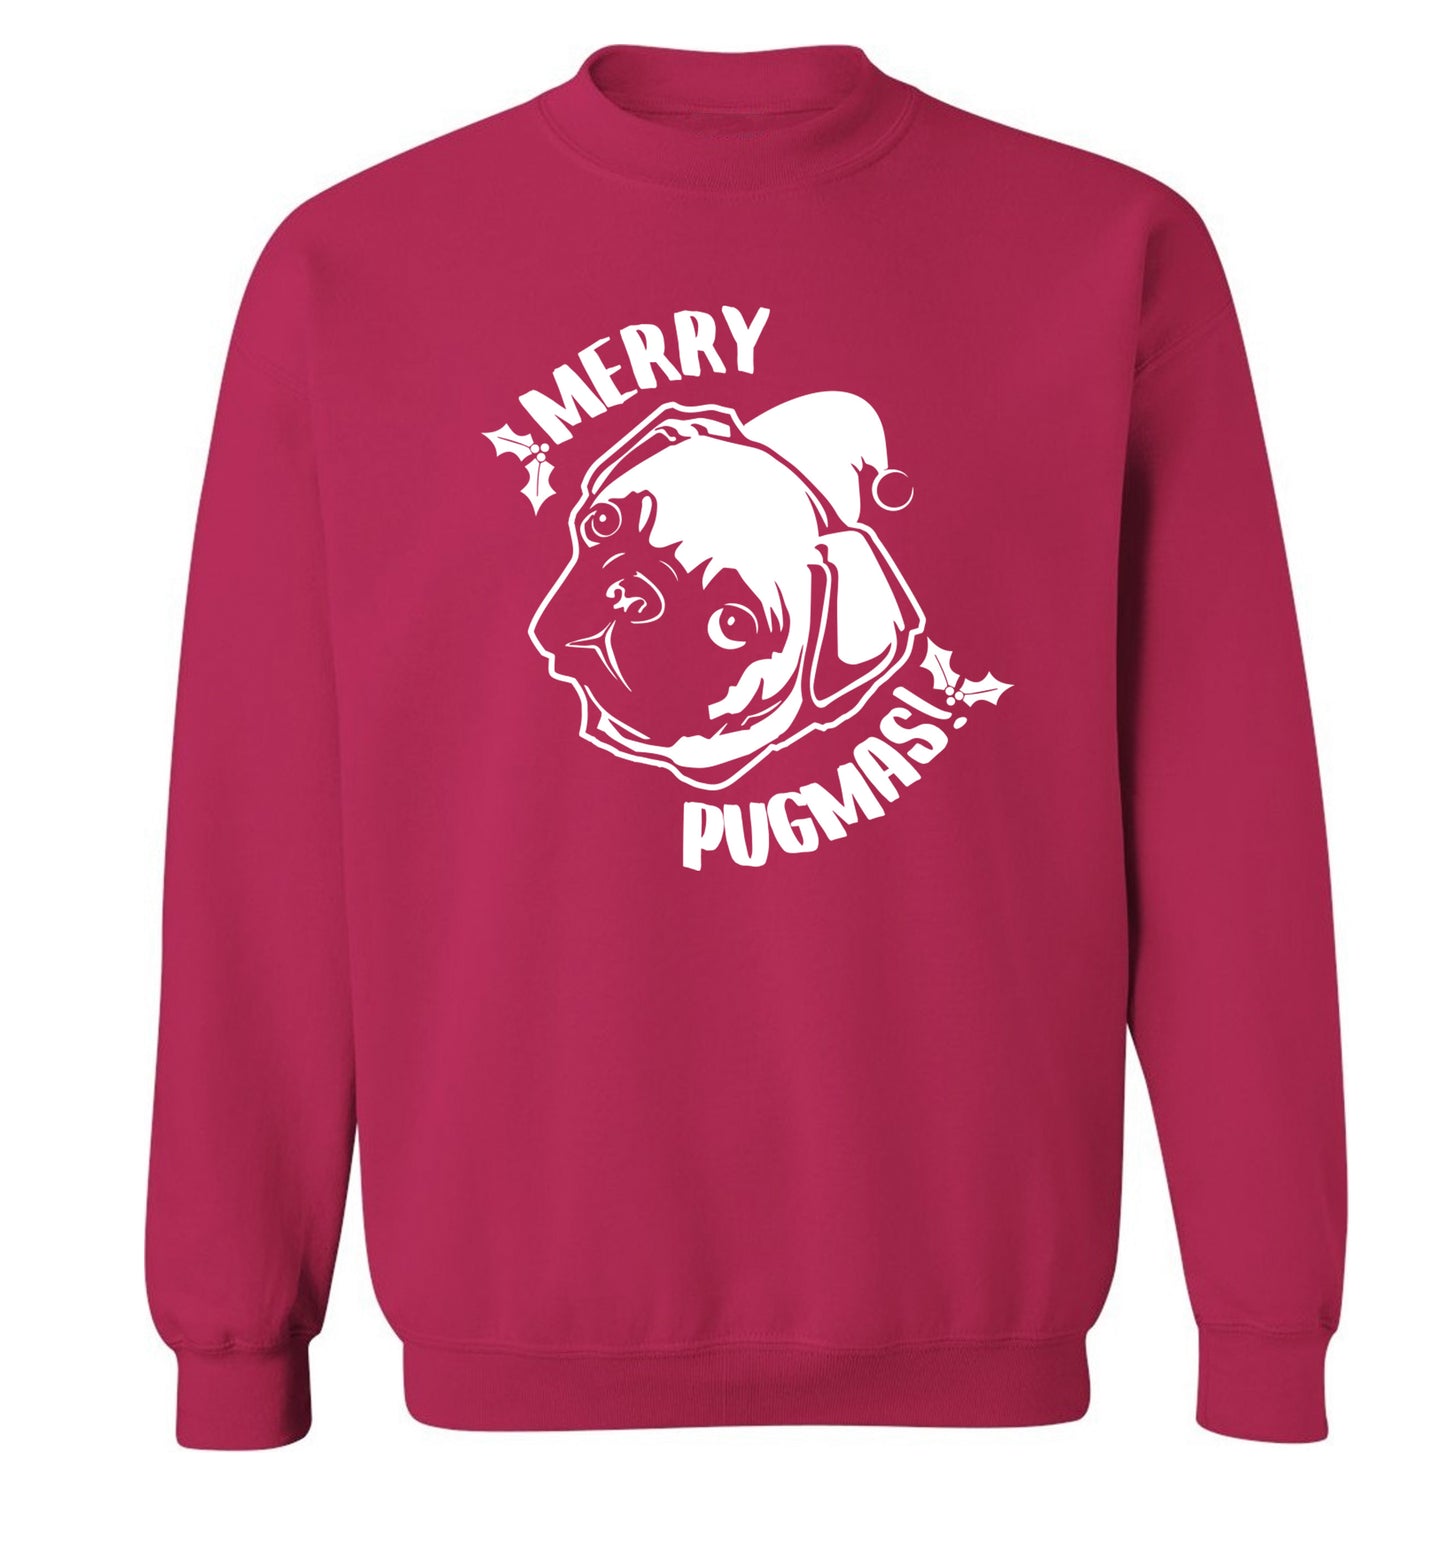 Merry Pugmas Adult's unisex pink Sweater 2XL